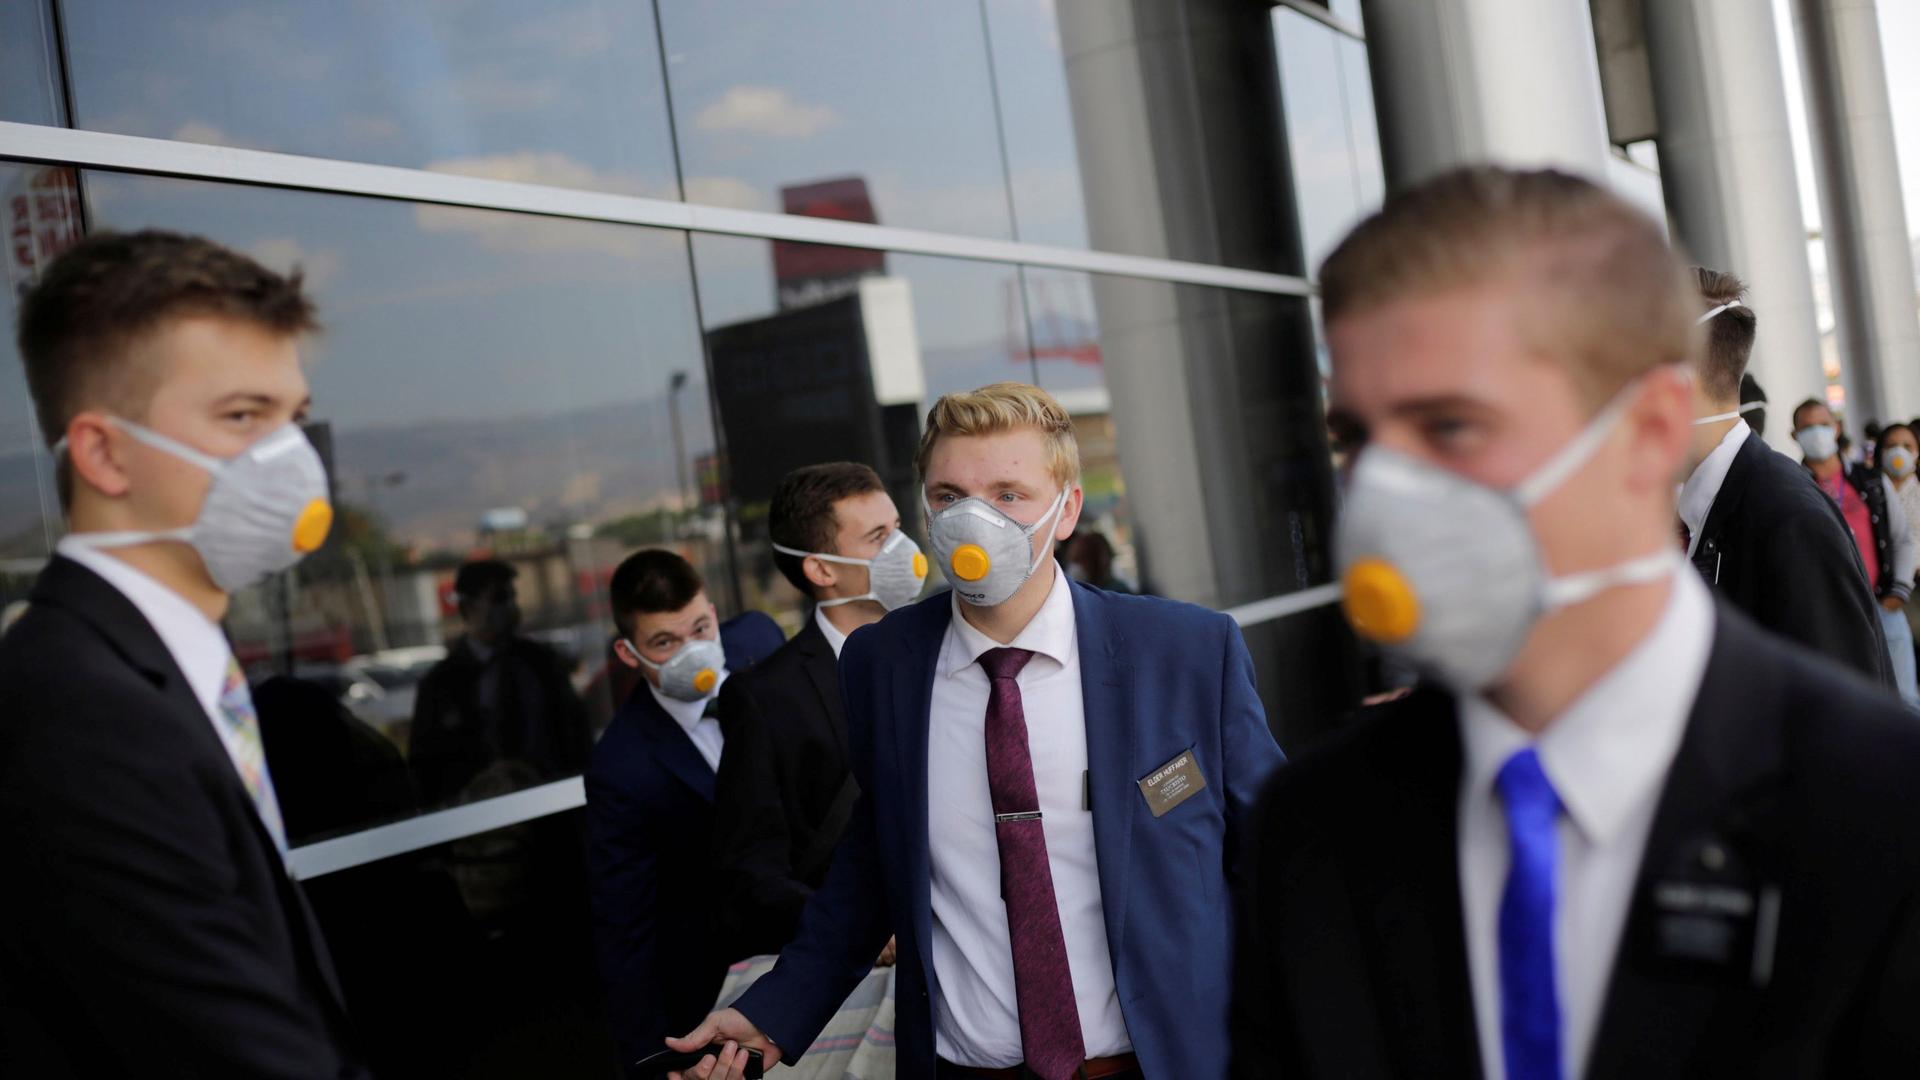 US members of The Church of Jesus Christ of Latter-day Saints, wearing protective masks, gather at Toncontin International airport before heading home, as the coronavirus disease (COVID-19) outbreak continues, in Tegucigalpa, Honduras, March 29, 2020.